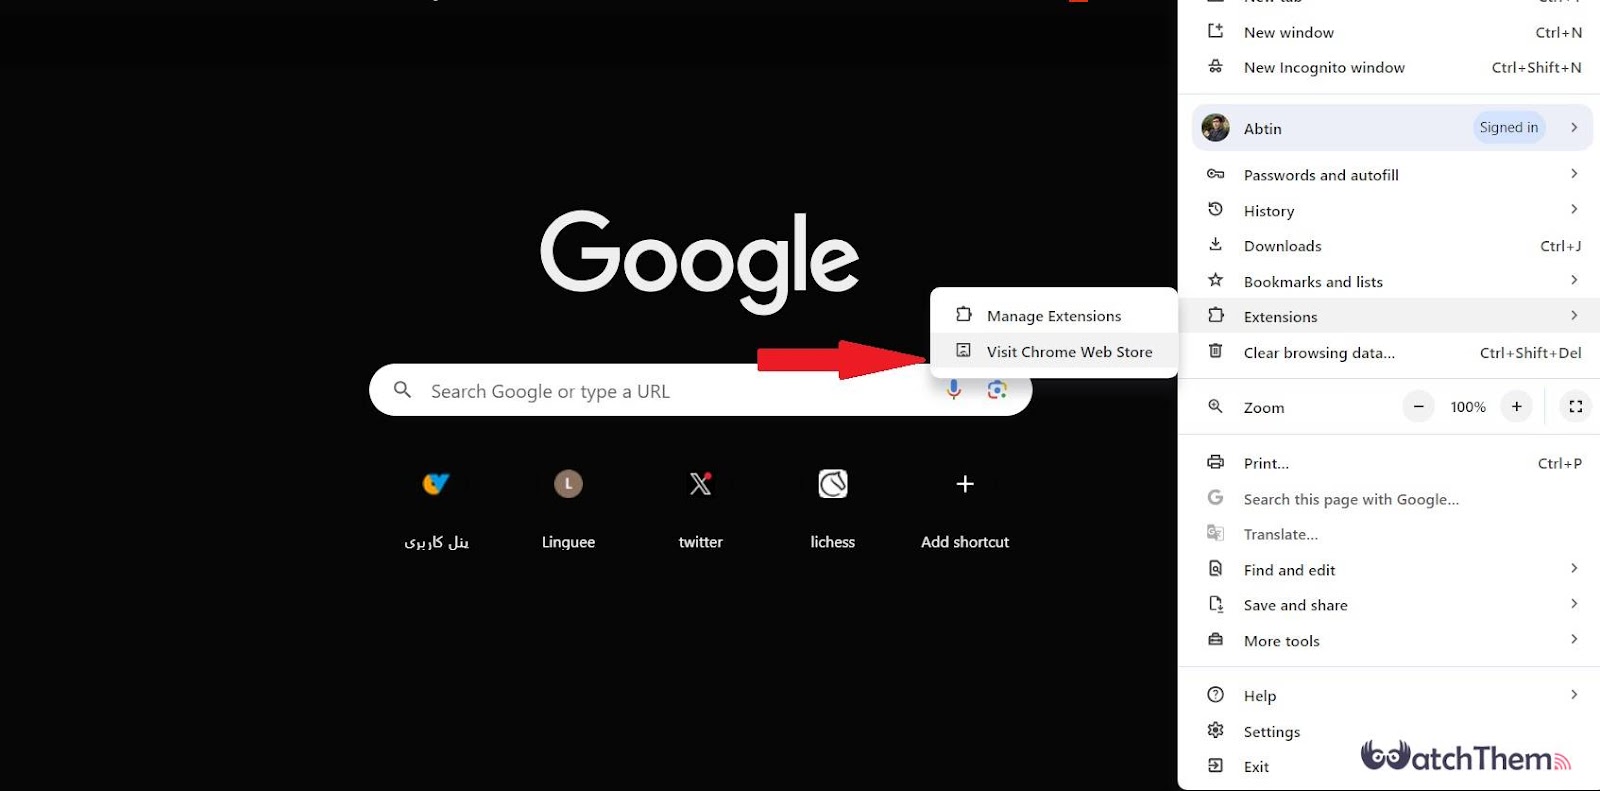 Chrome Extensions in the navigation bar